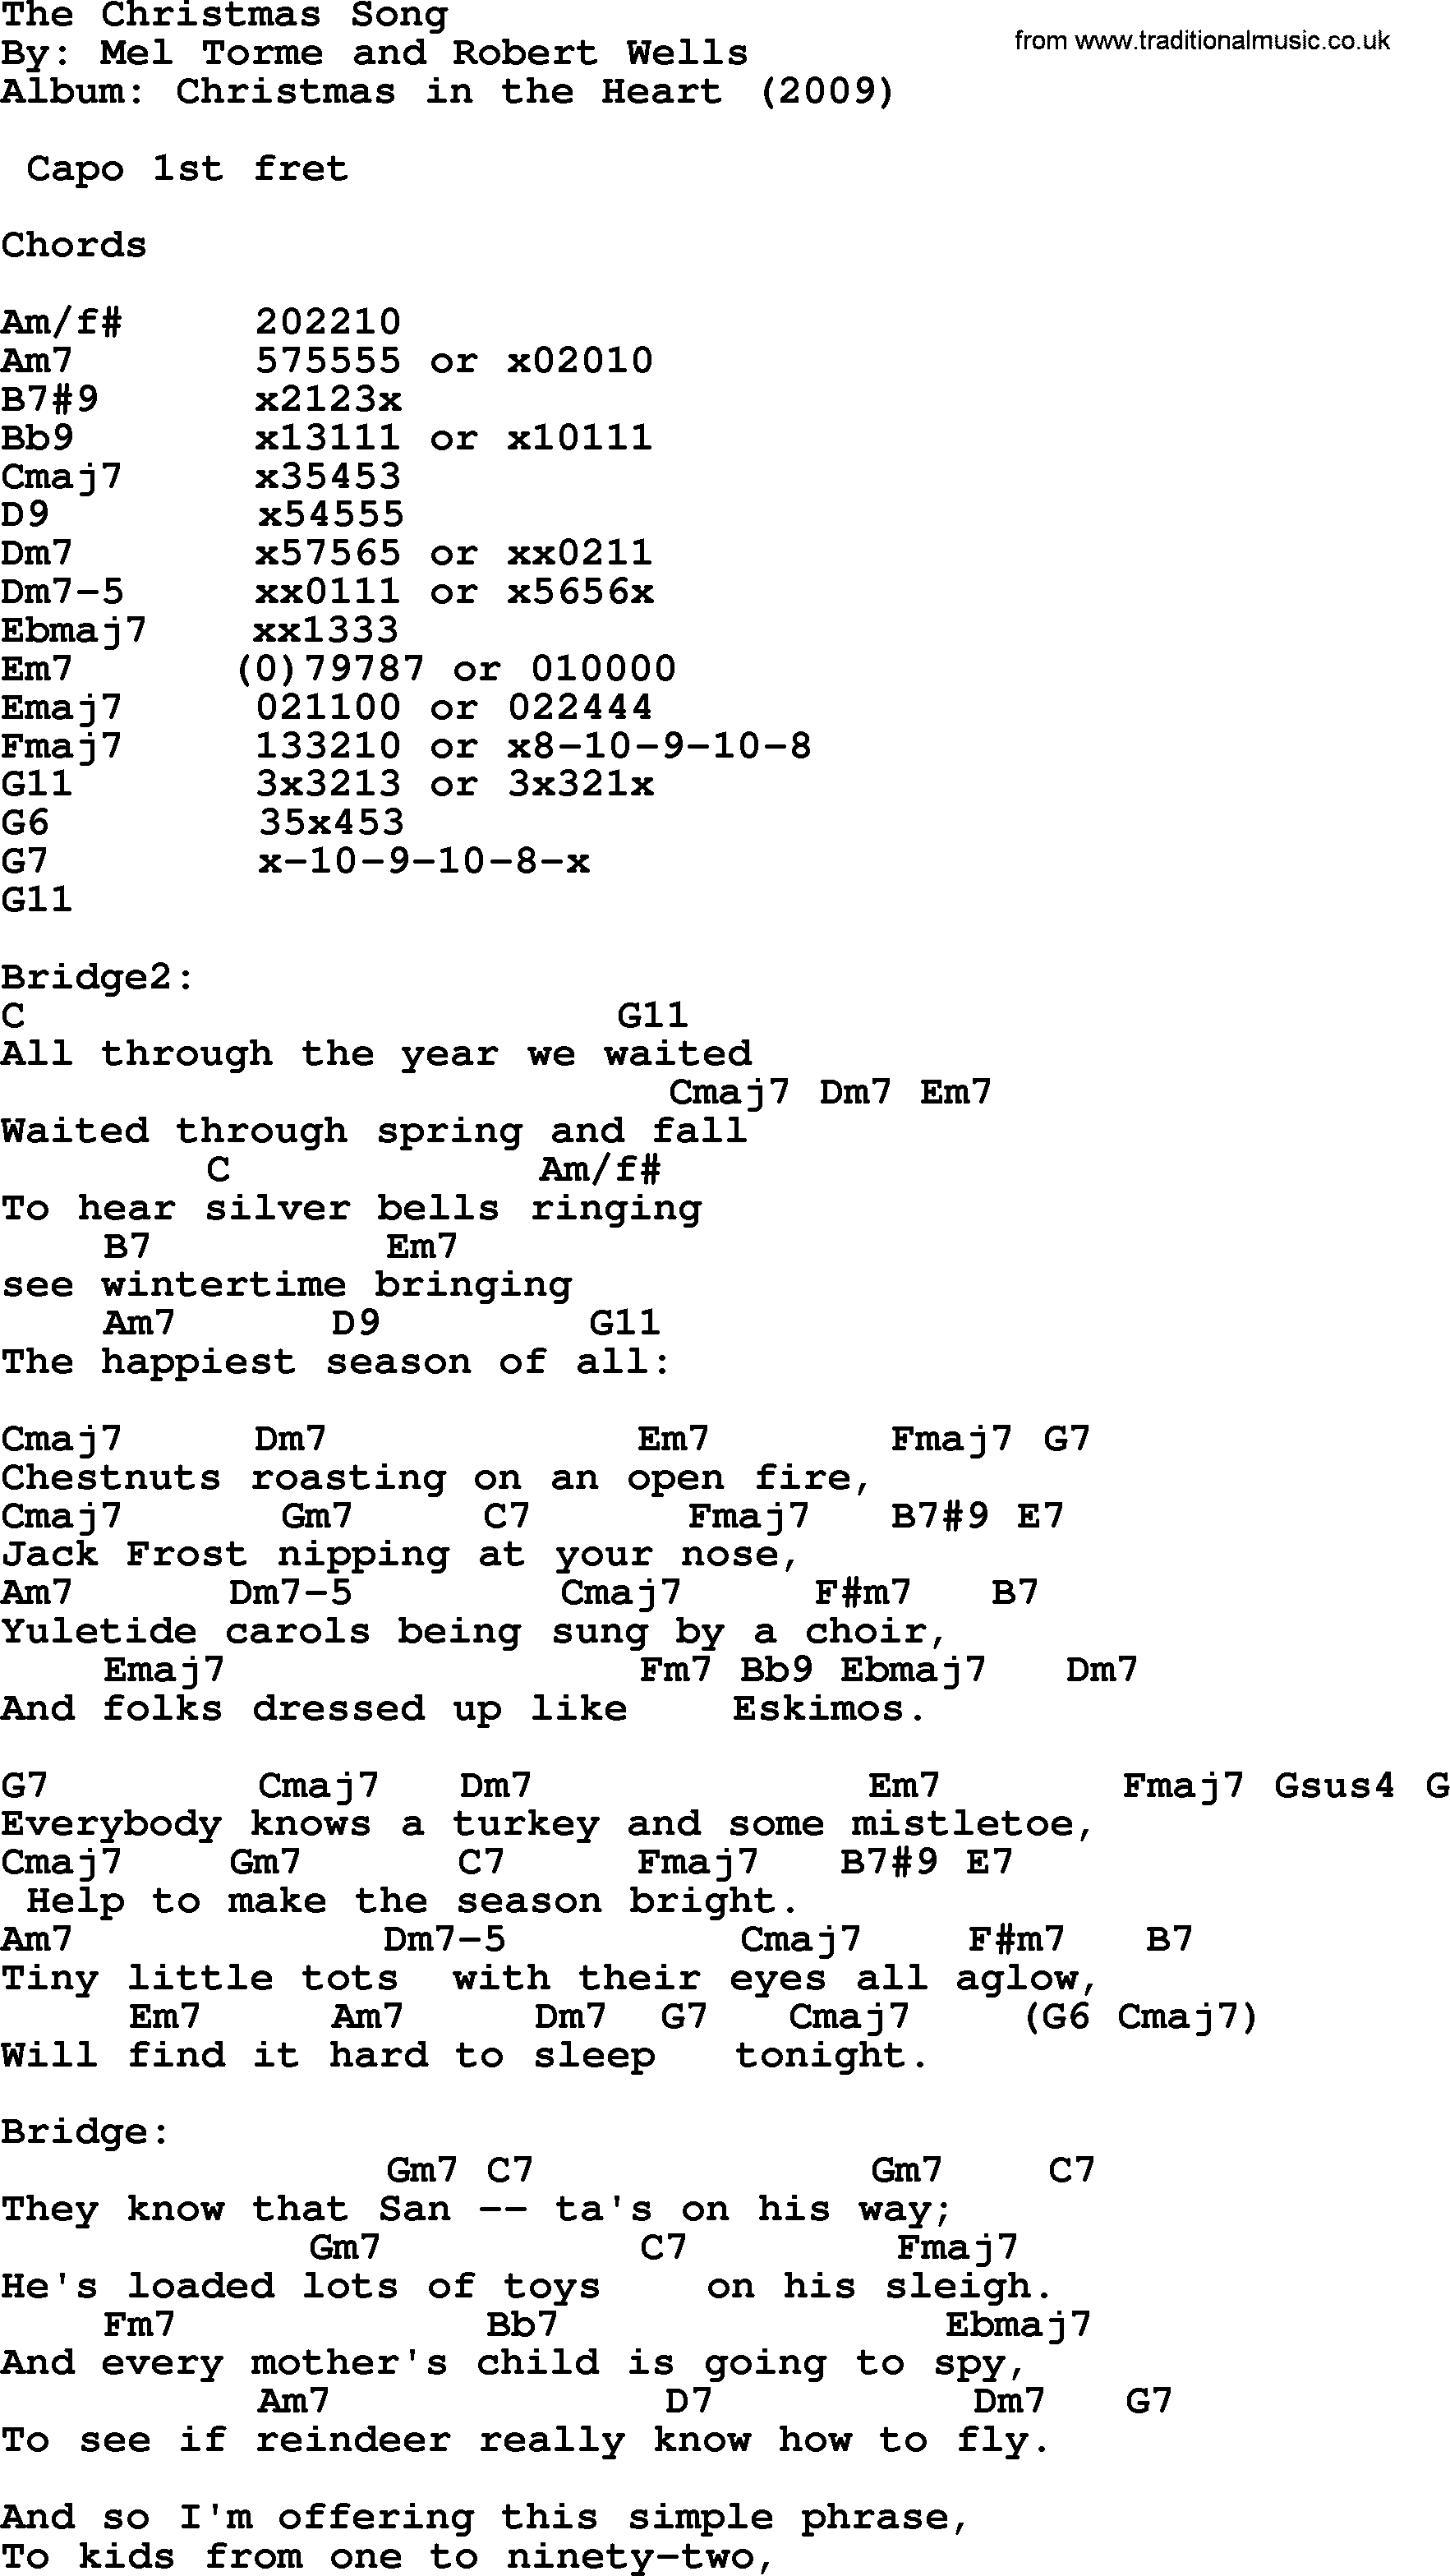 Bob Dylan song, lyrics with chords - The Christmas Song